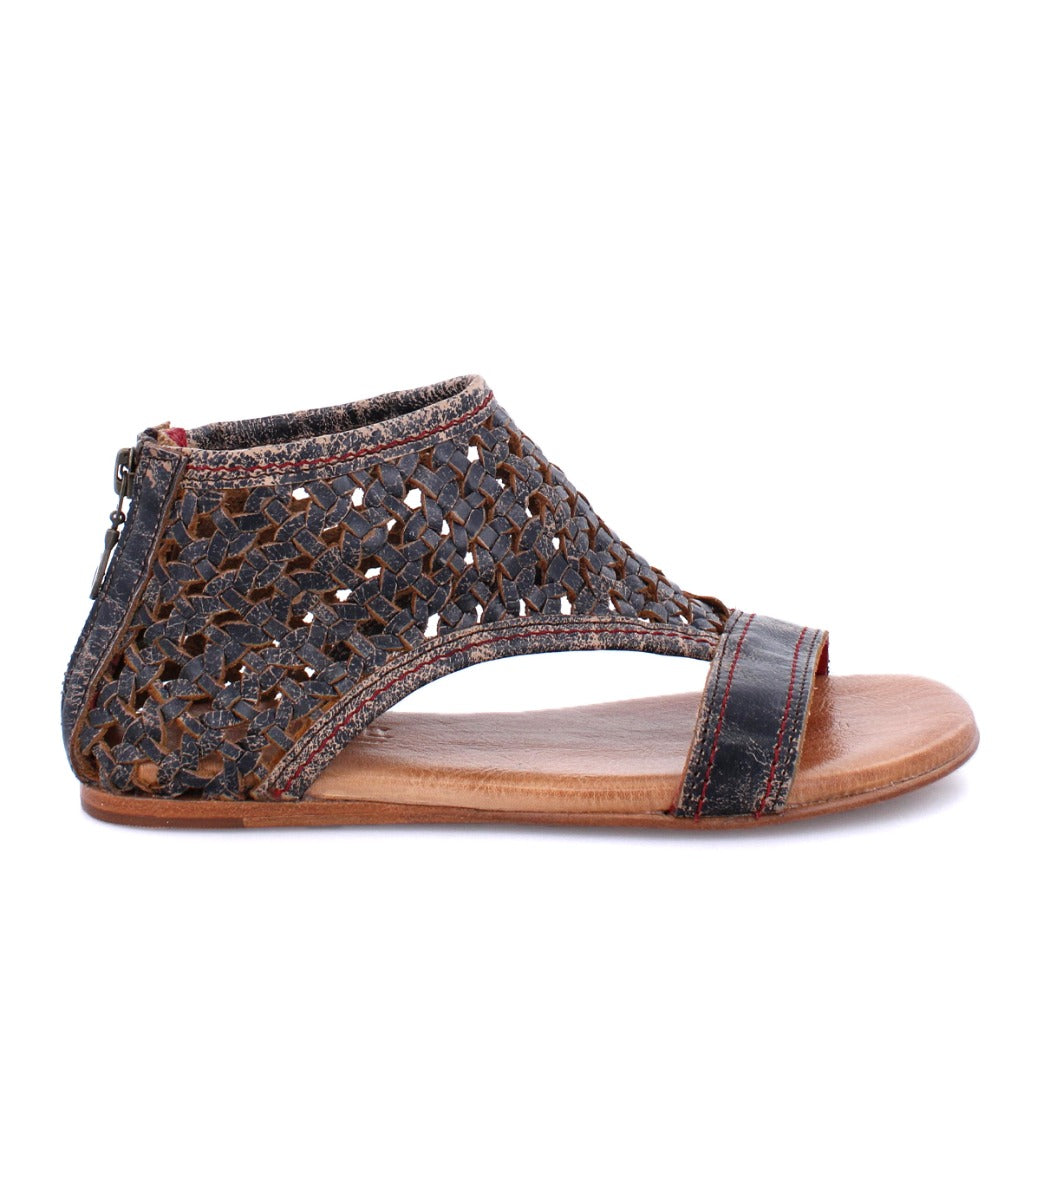 Bed Stu Kimberly women's leather sandals.